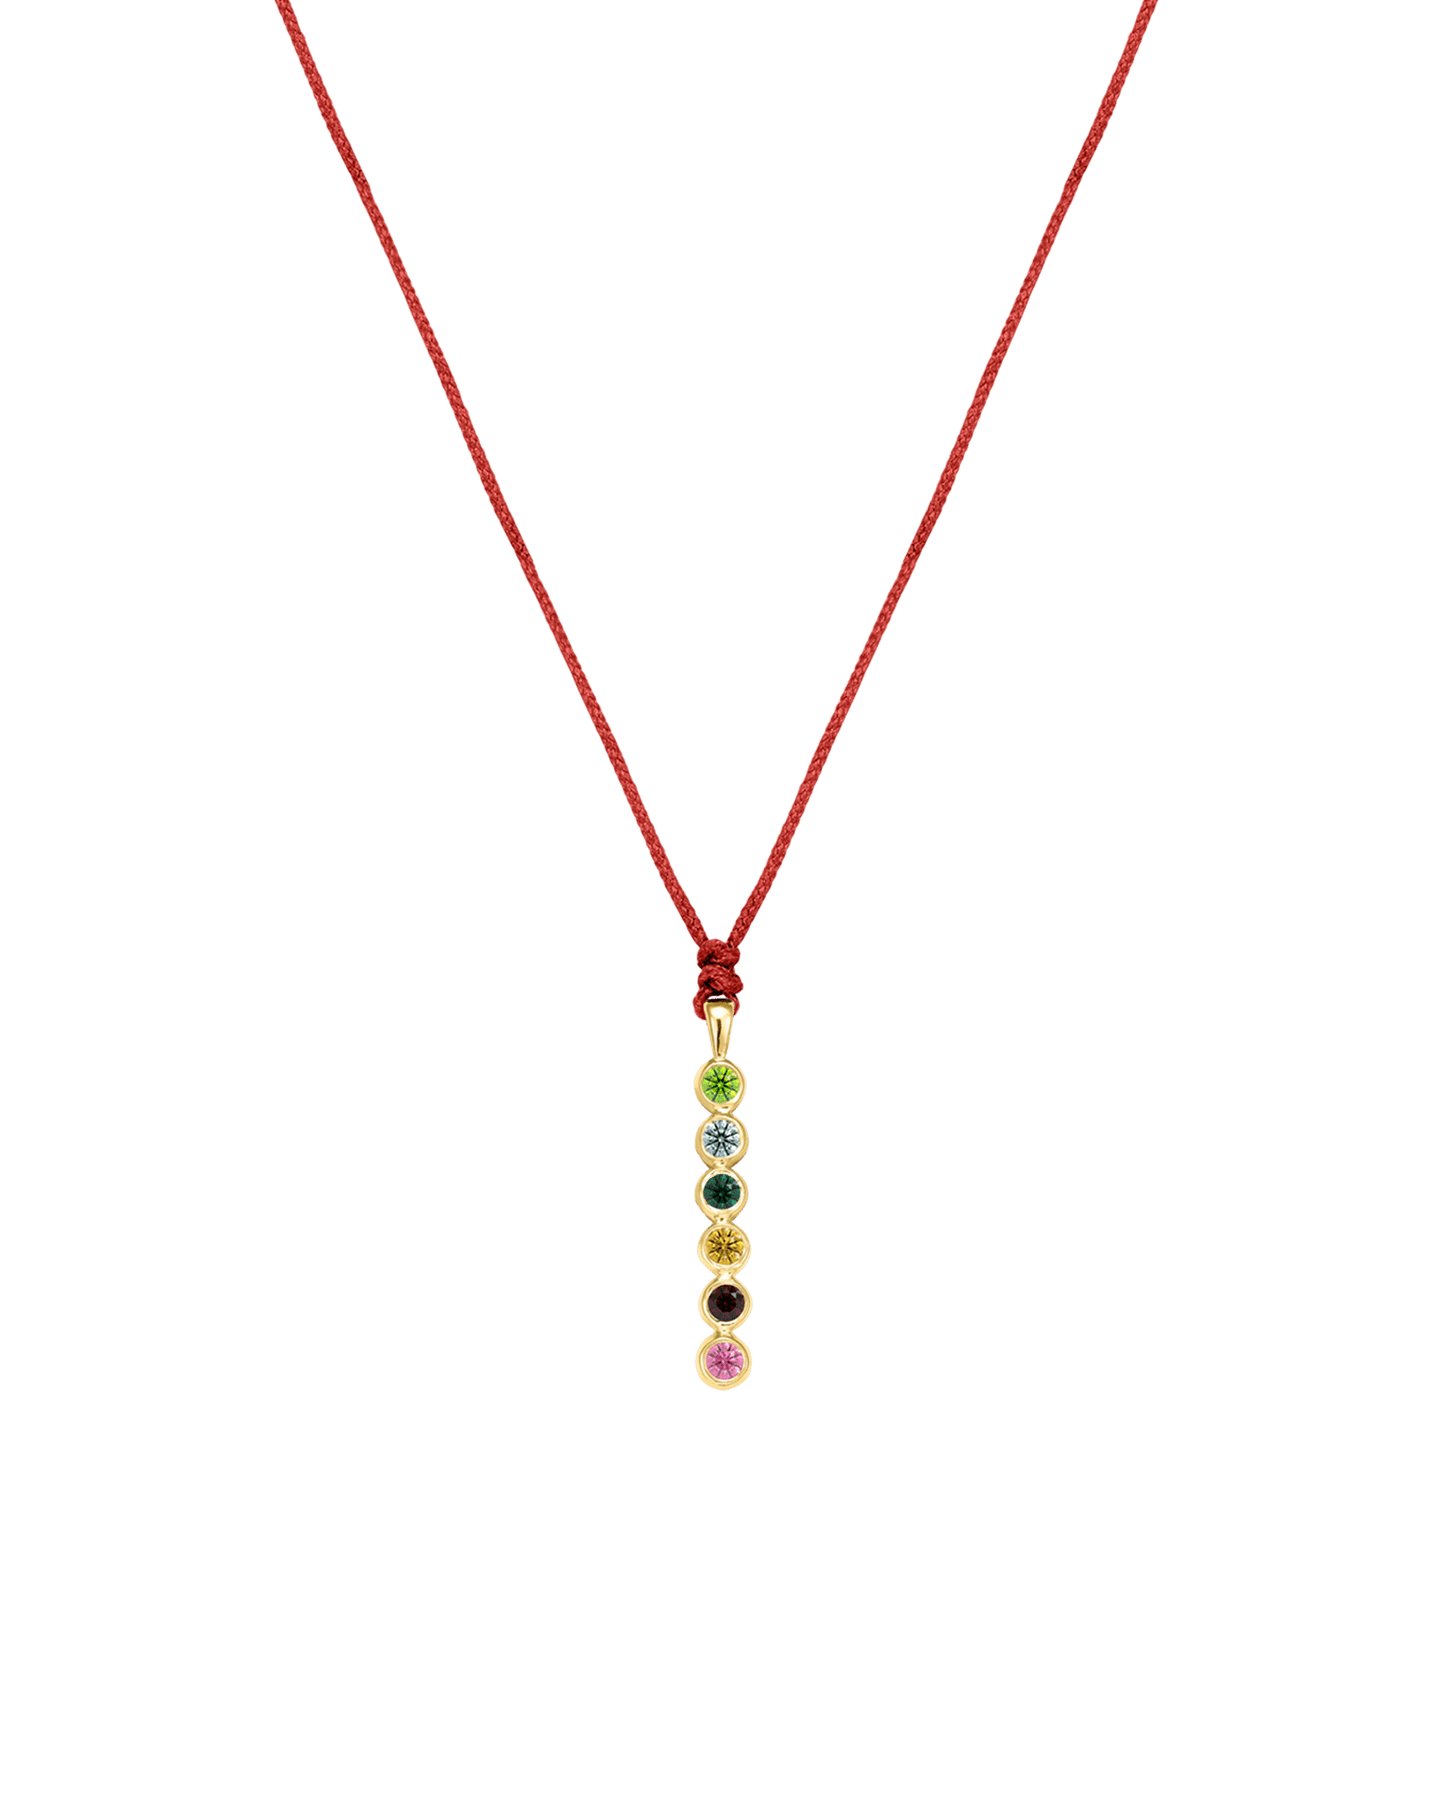 The Birthstones Bar Necklace - 14K Yellow Gold Necklaces 14K Solid Gold Red 2 